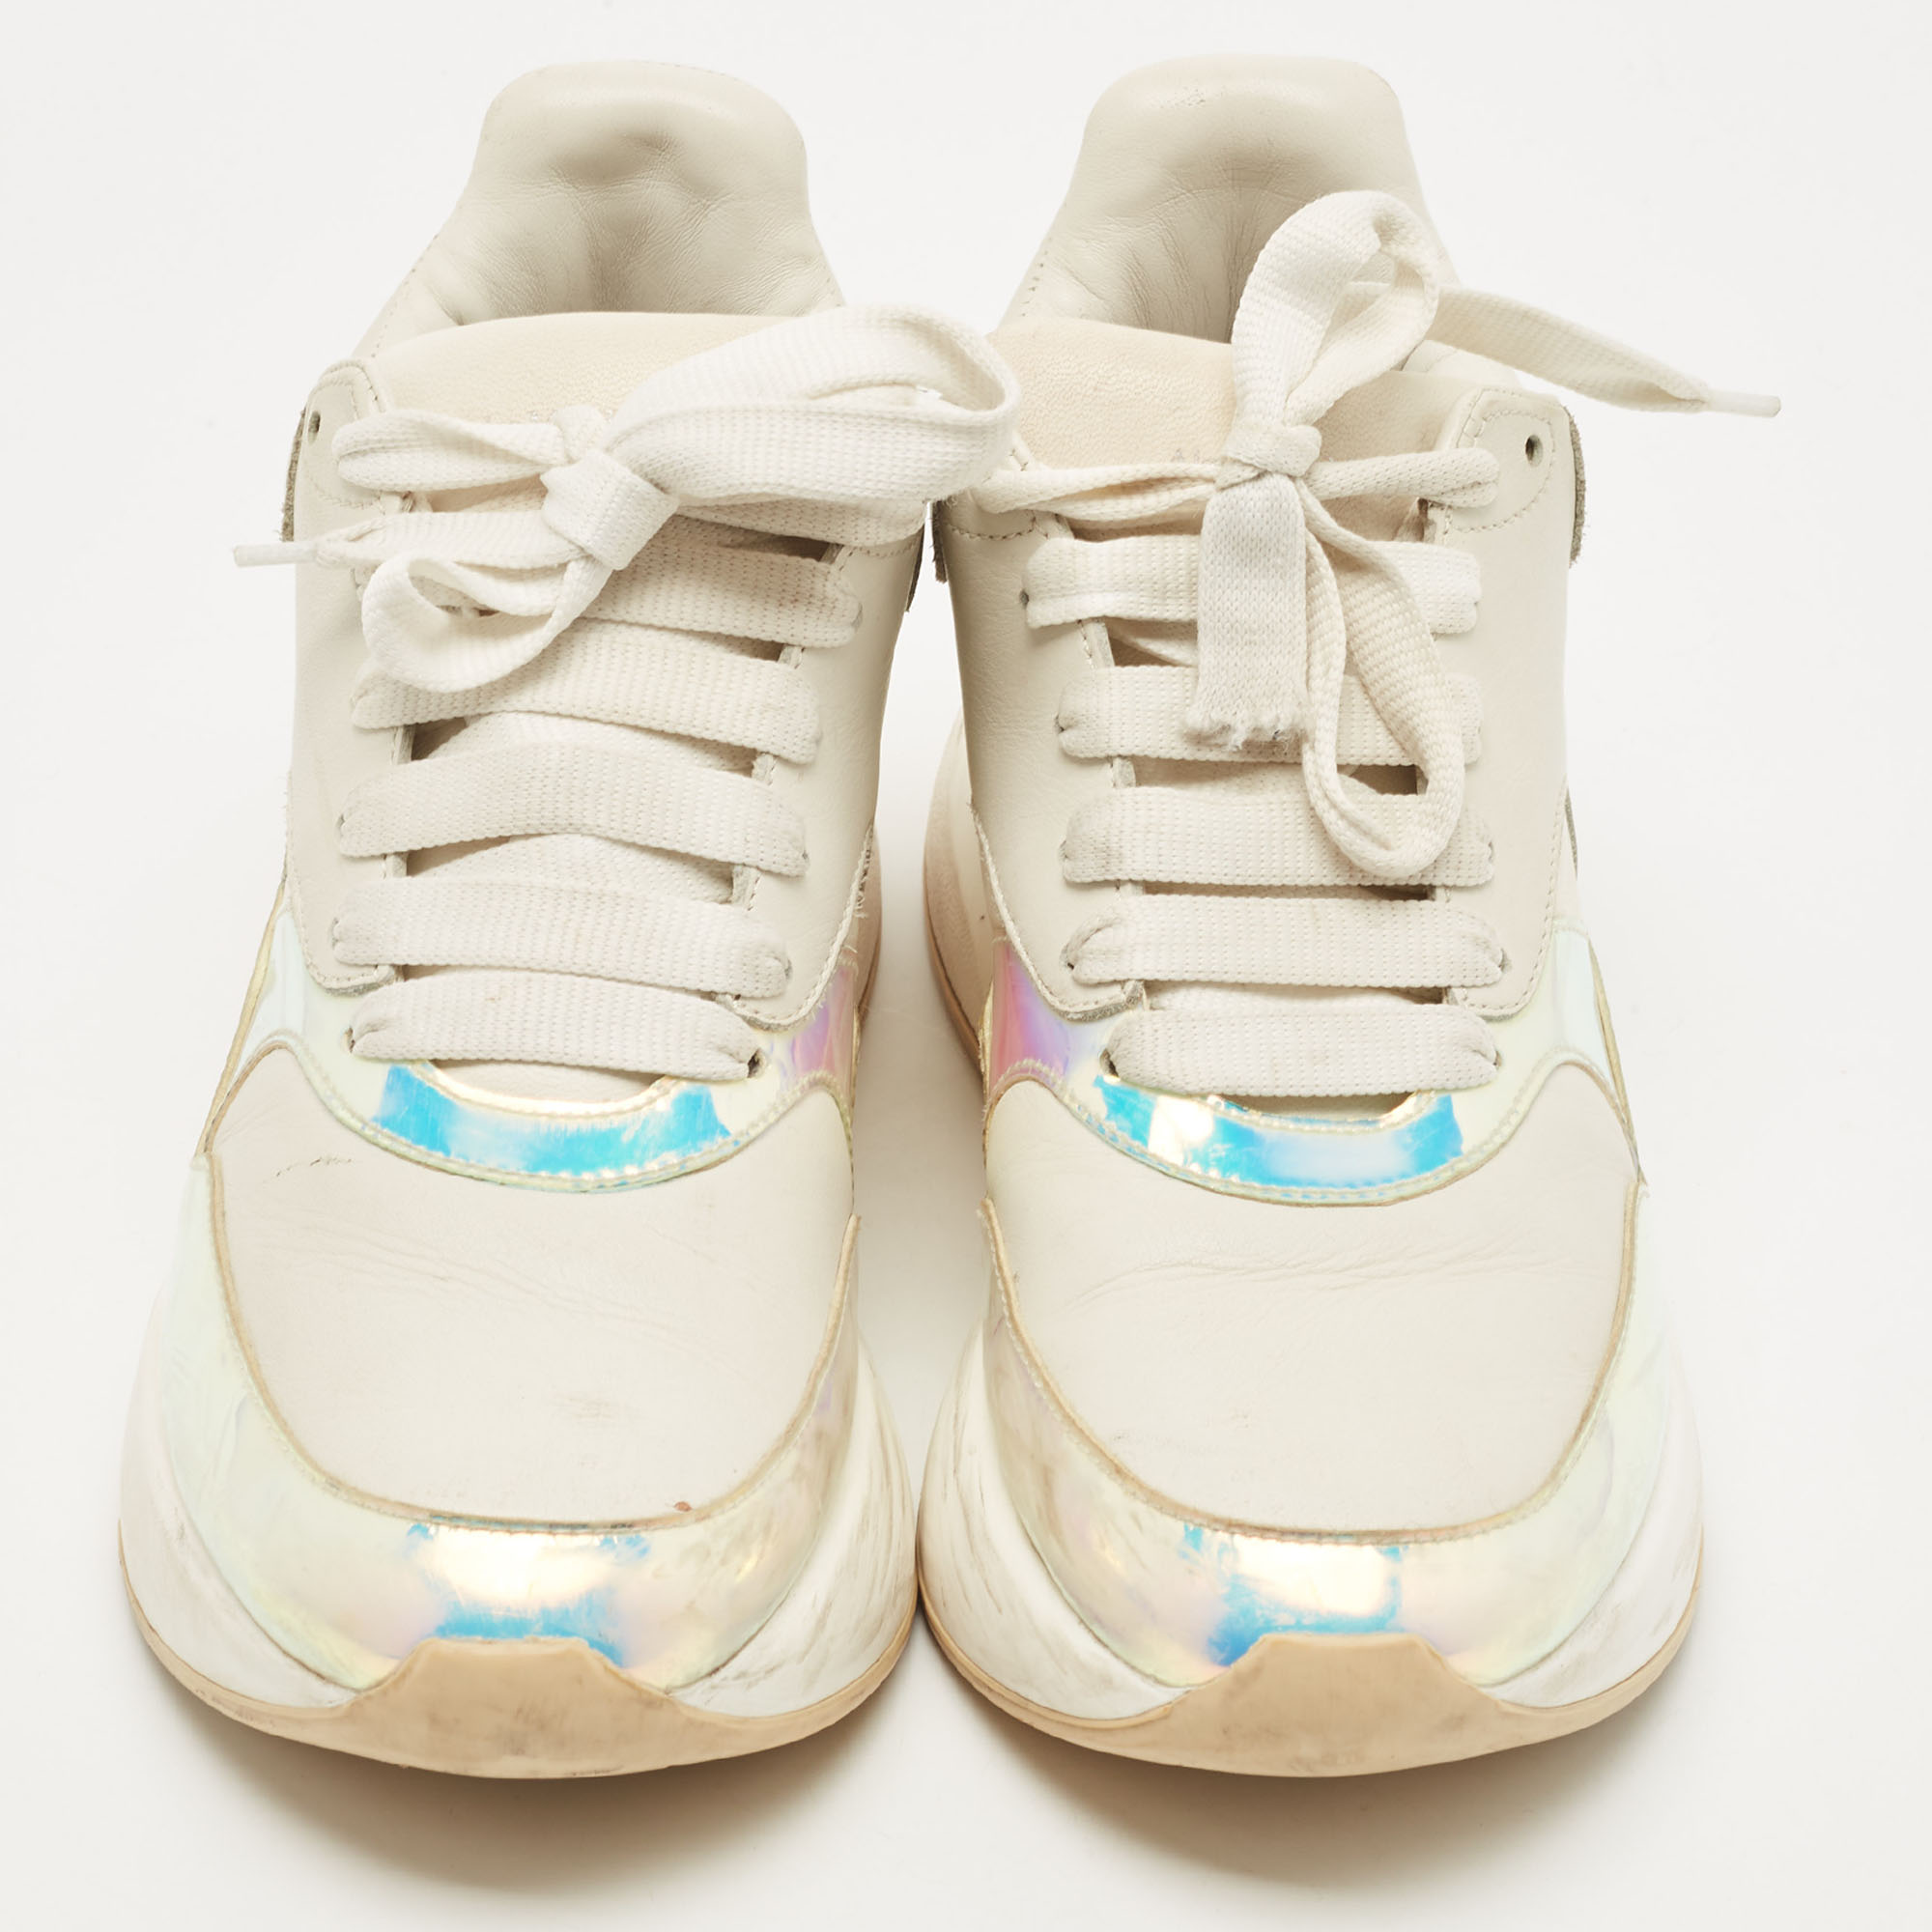 Alexander McQueen White Leather And Iridescent PVC Chunky Sneakers Size 38